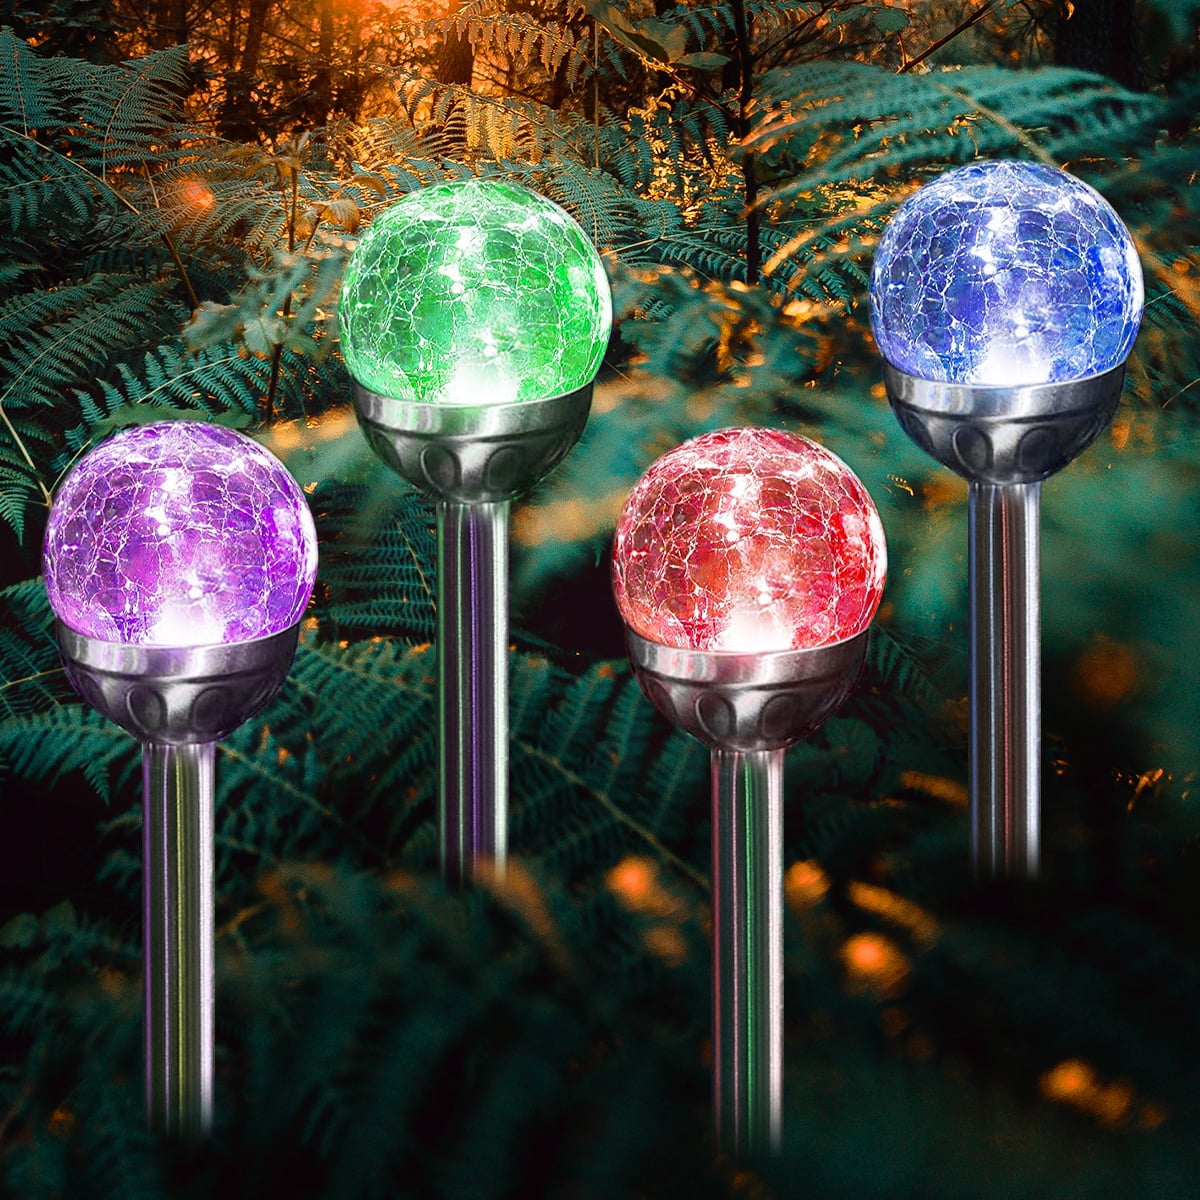 Solar Globe Lights Outdoor, Cracked Glass Ball Dual LED Garden Lights,Color-Changing  Outdoor Landscape Garden Light Decoration, Garden Decor Pcs